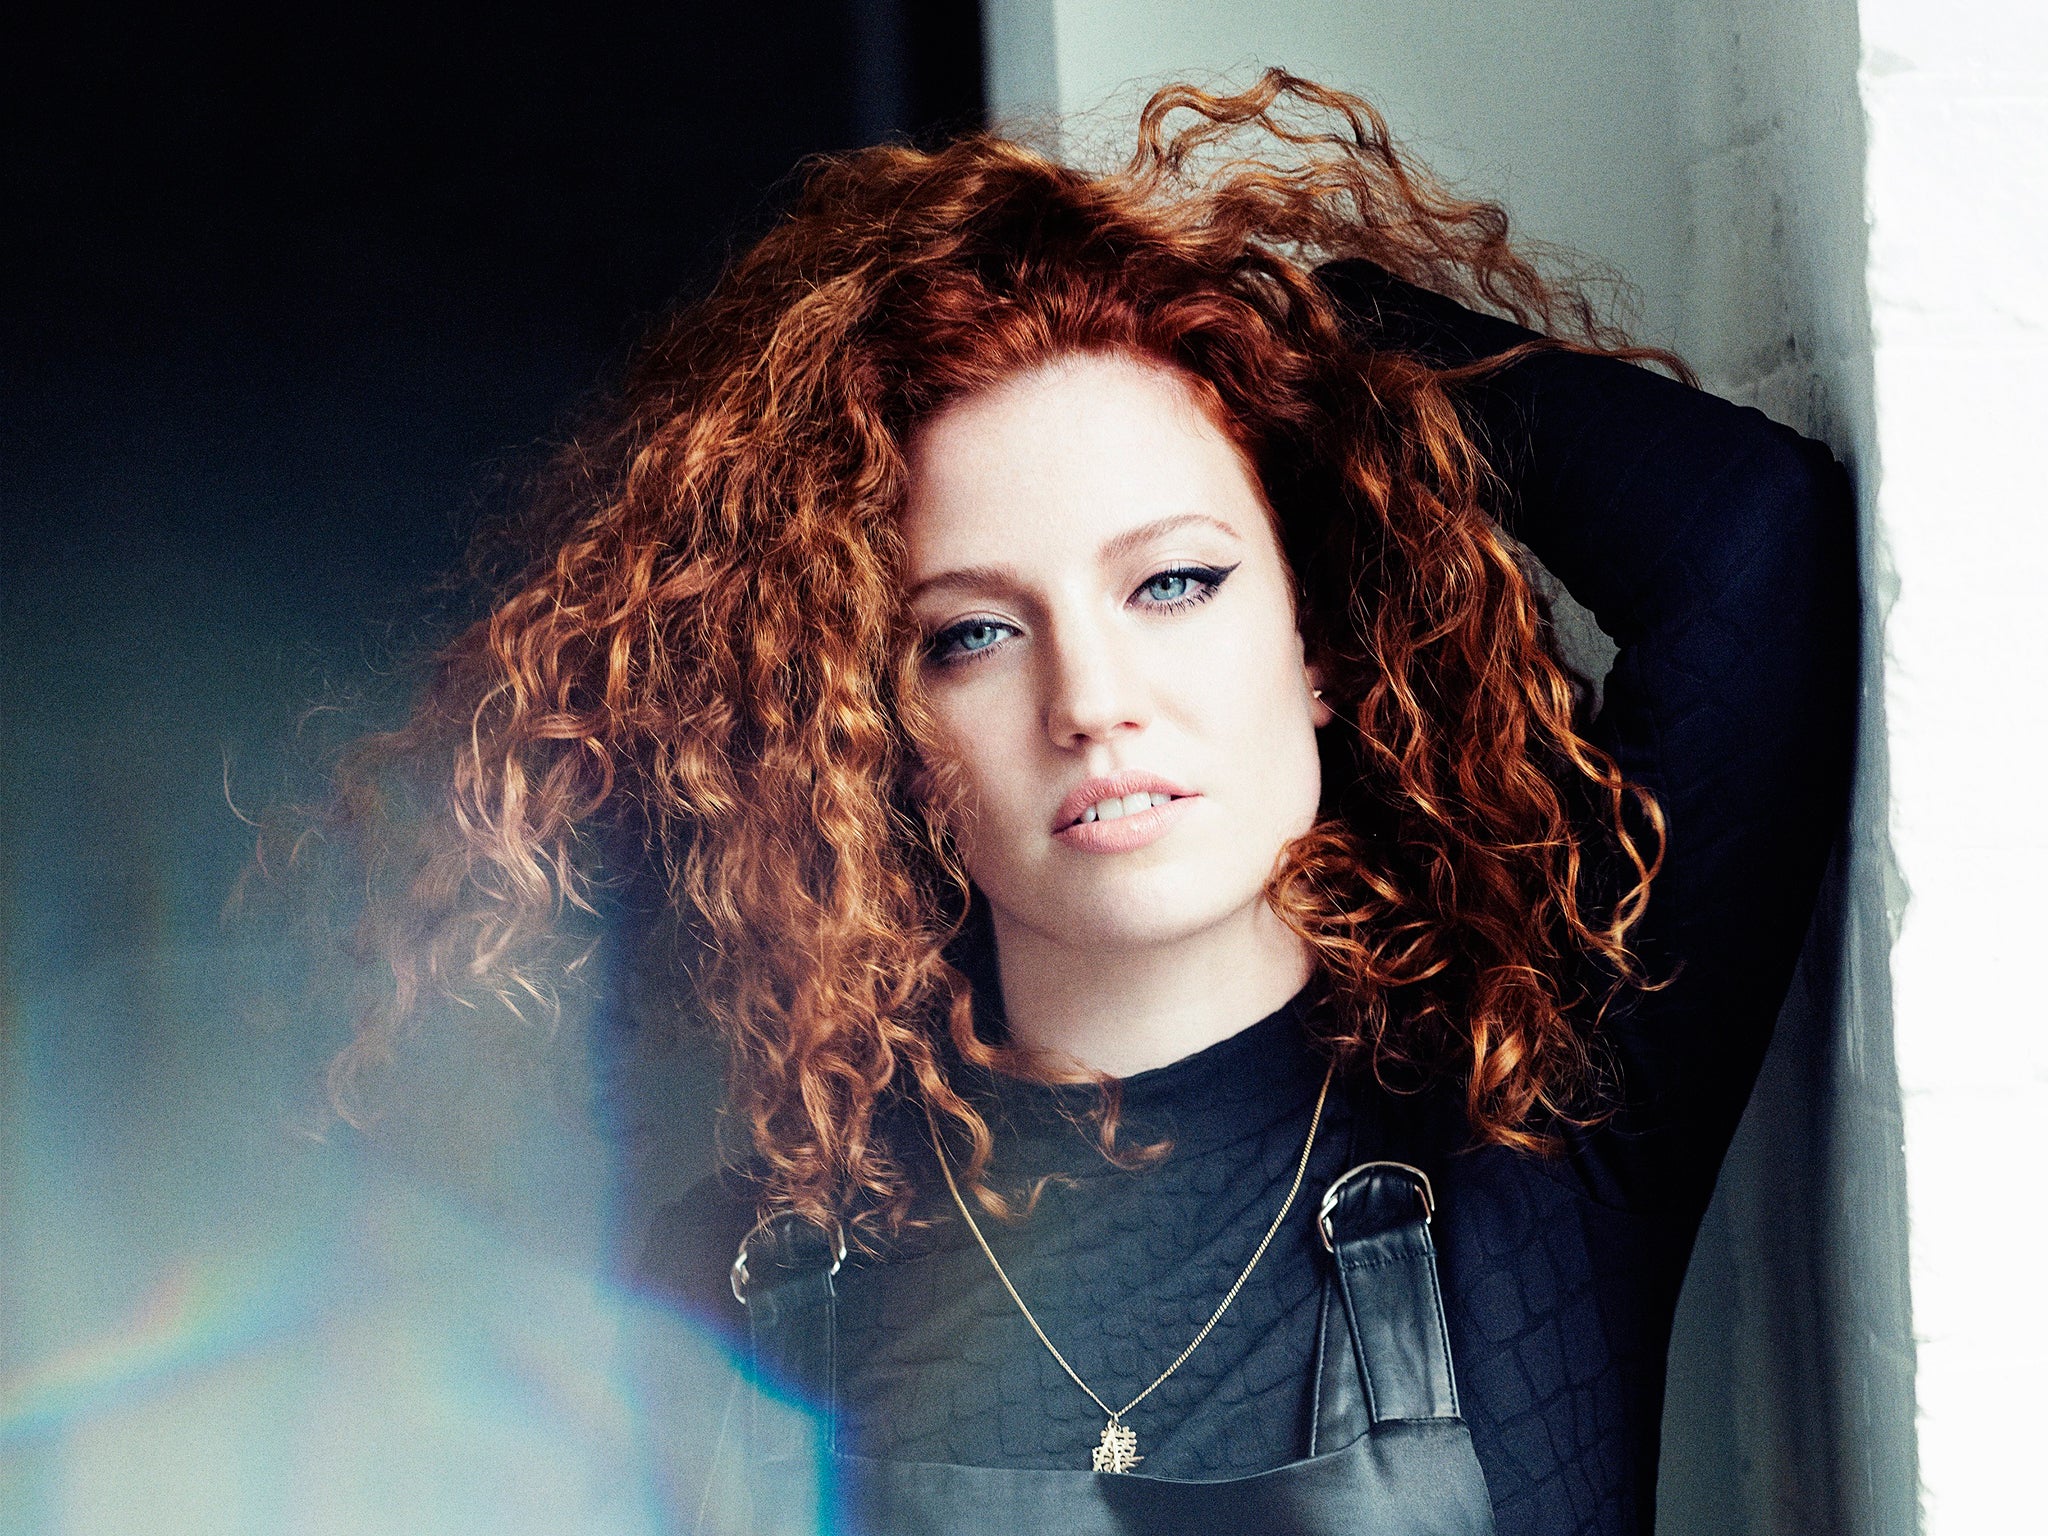 Last year Glynne became only the second British female solo artist to have five number one singles in the UK